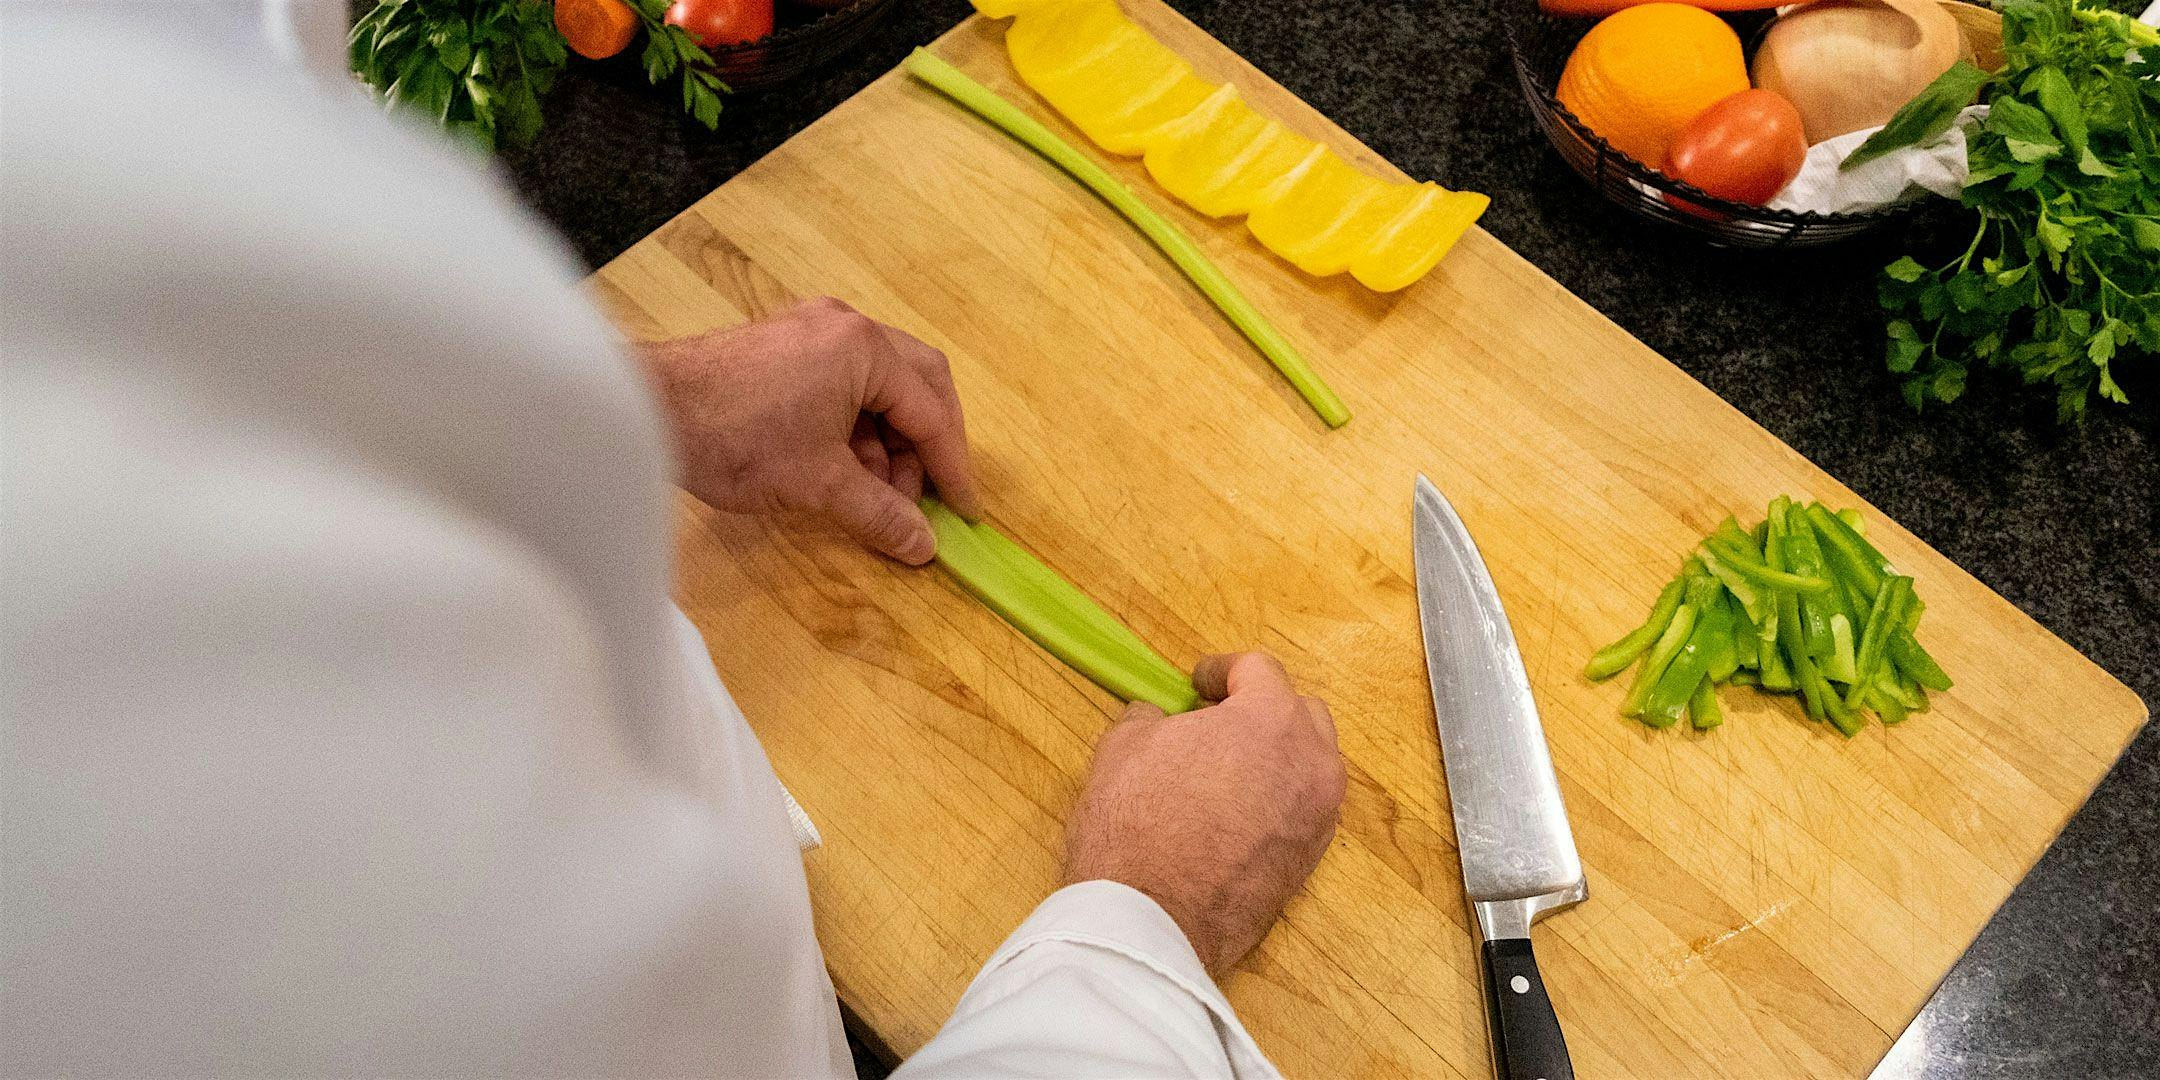 TEENS: Perfect Your Knife Skills